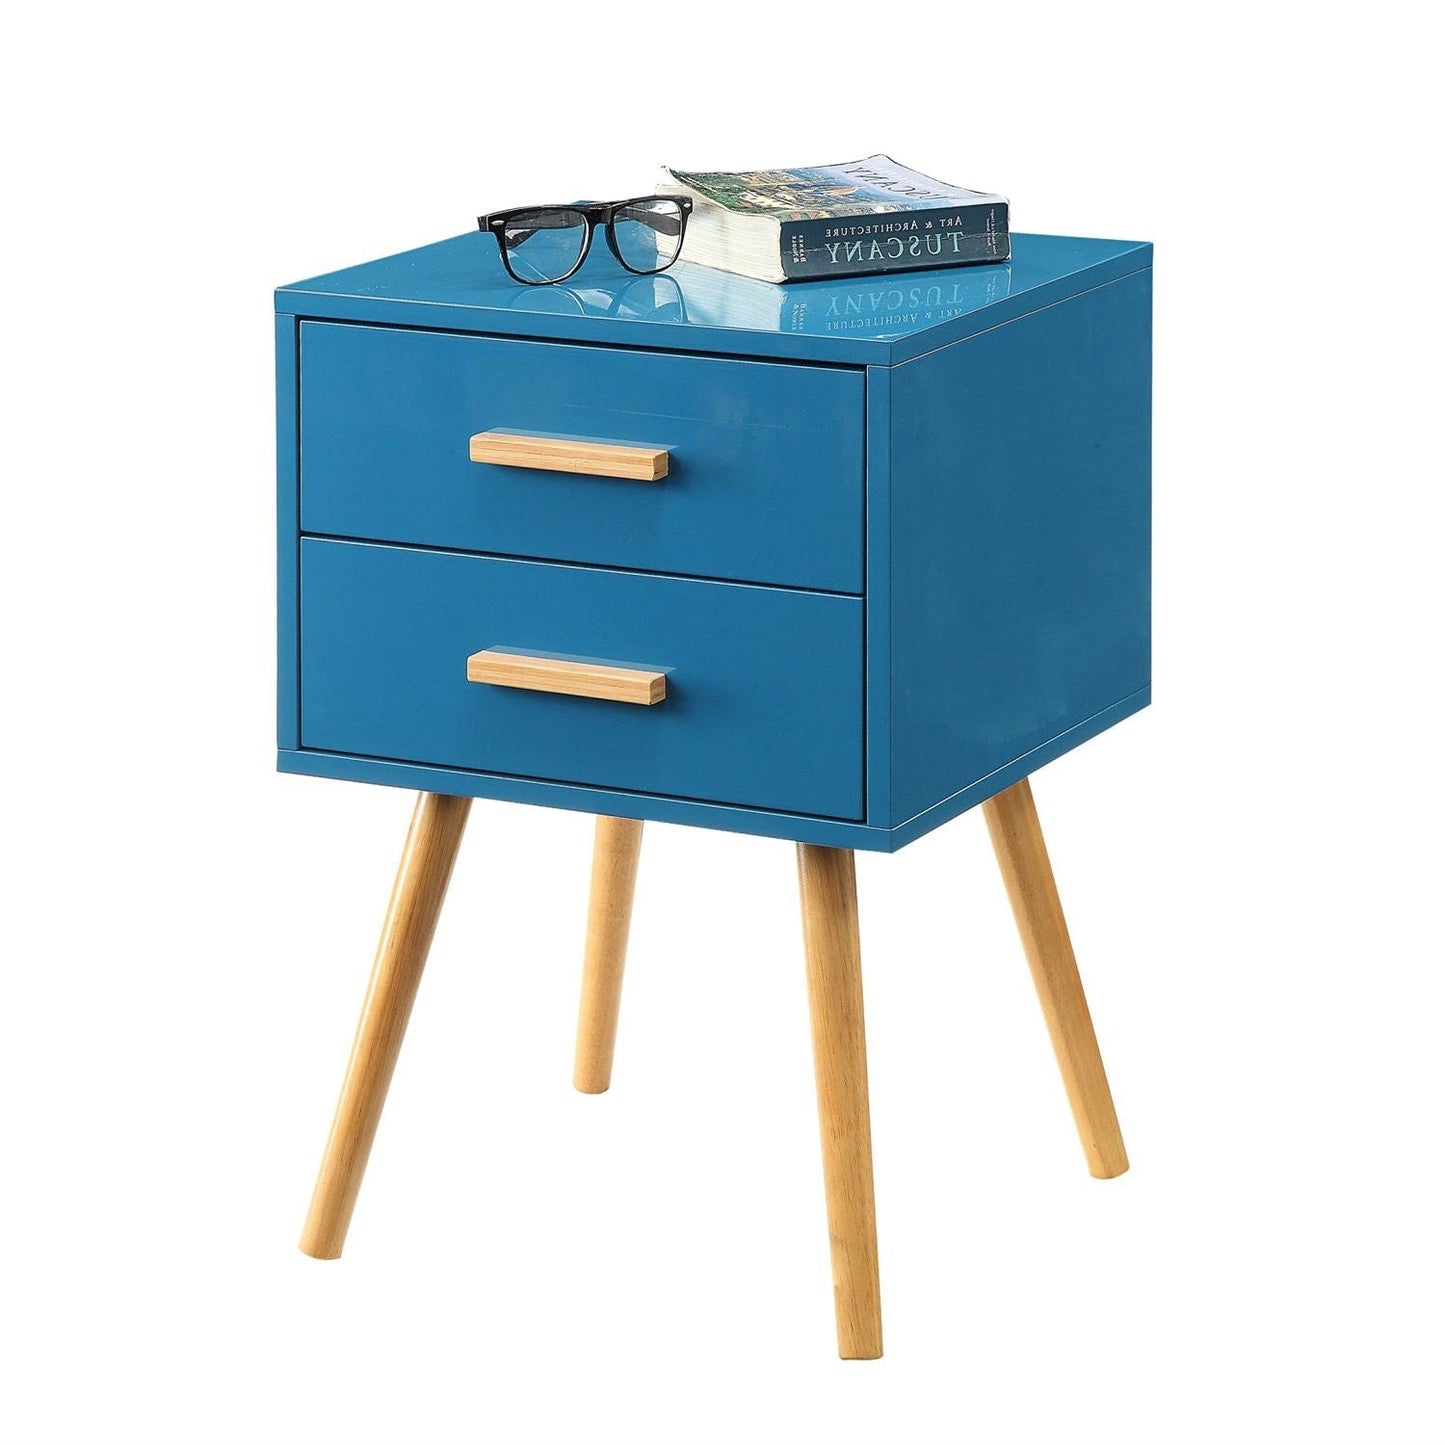 Living Room > Coffee Tables - Modern Classic Mid-Century Style End Table Nightstand In Blue Finish